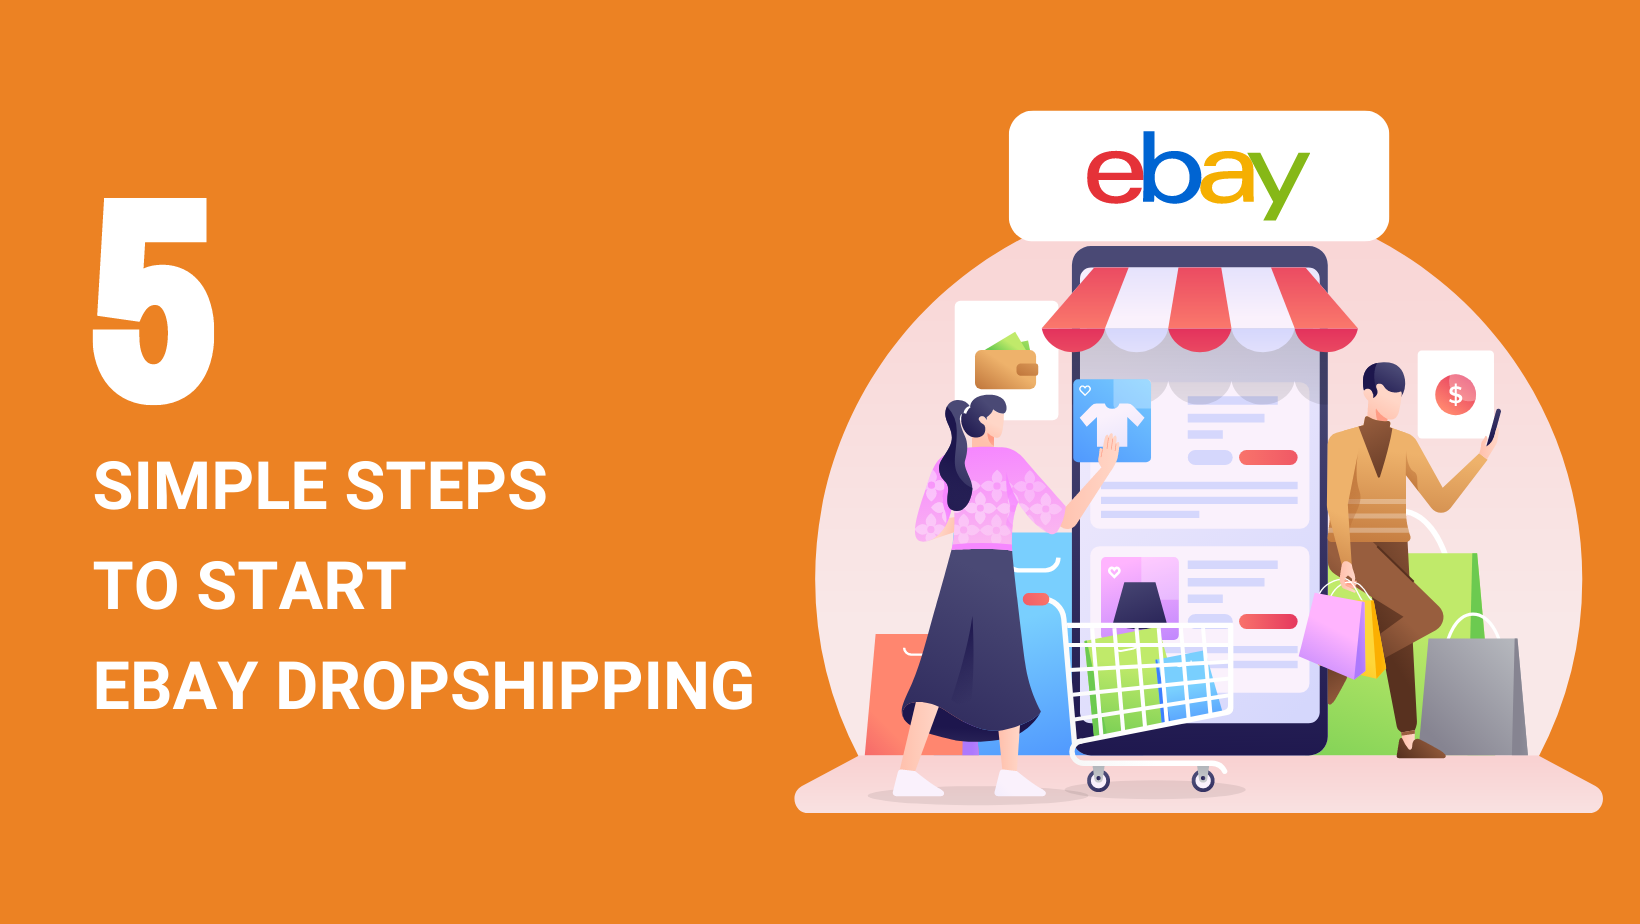 5 SIMPLE STEPS TO START EBAY DROPSHIPPING